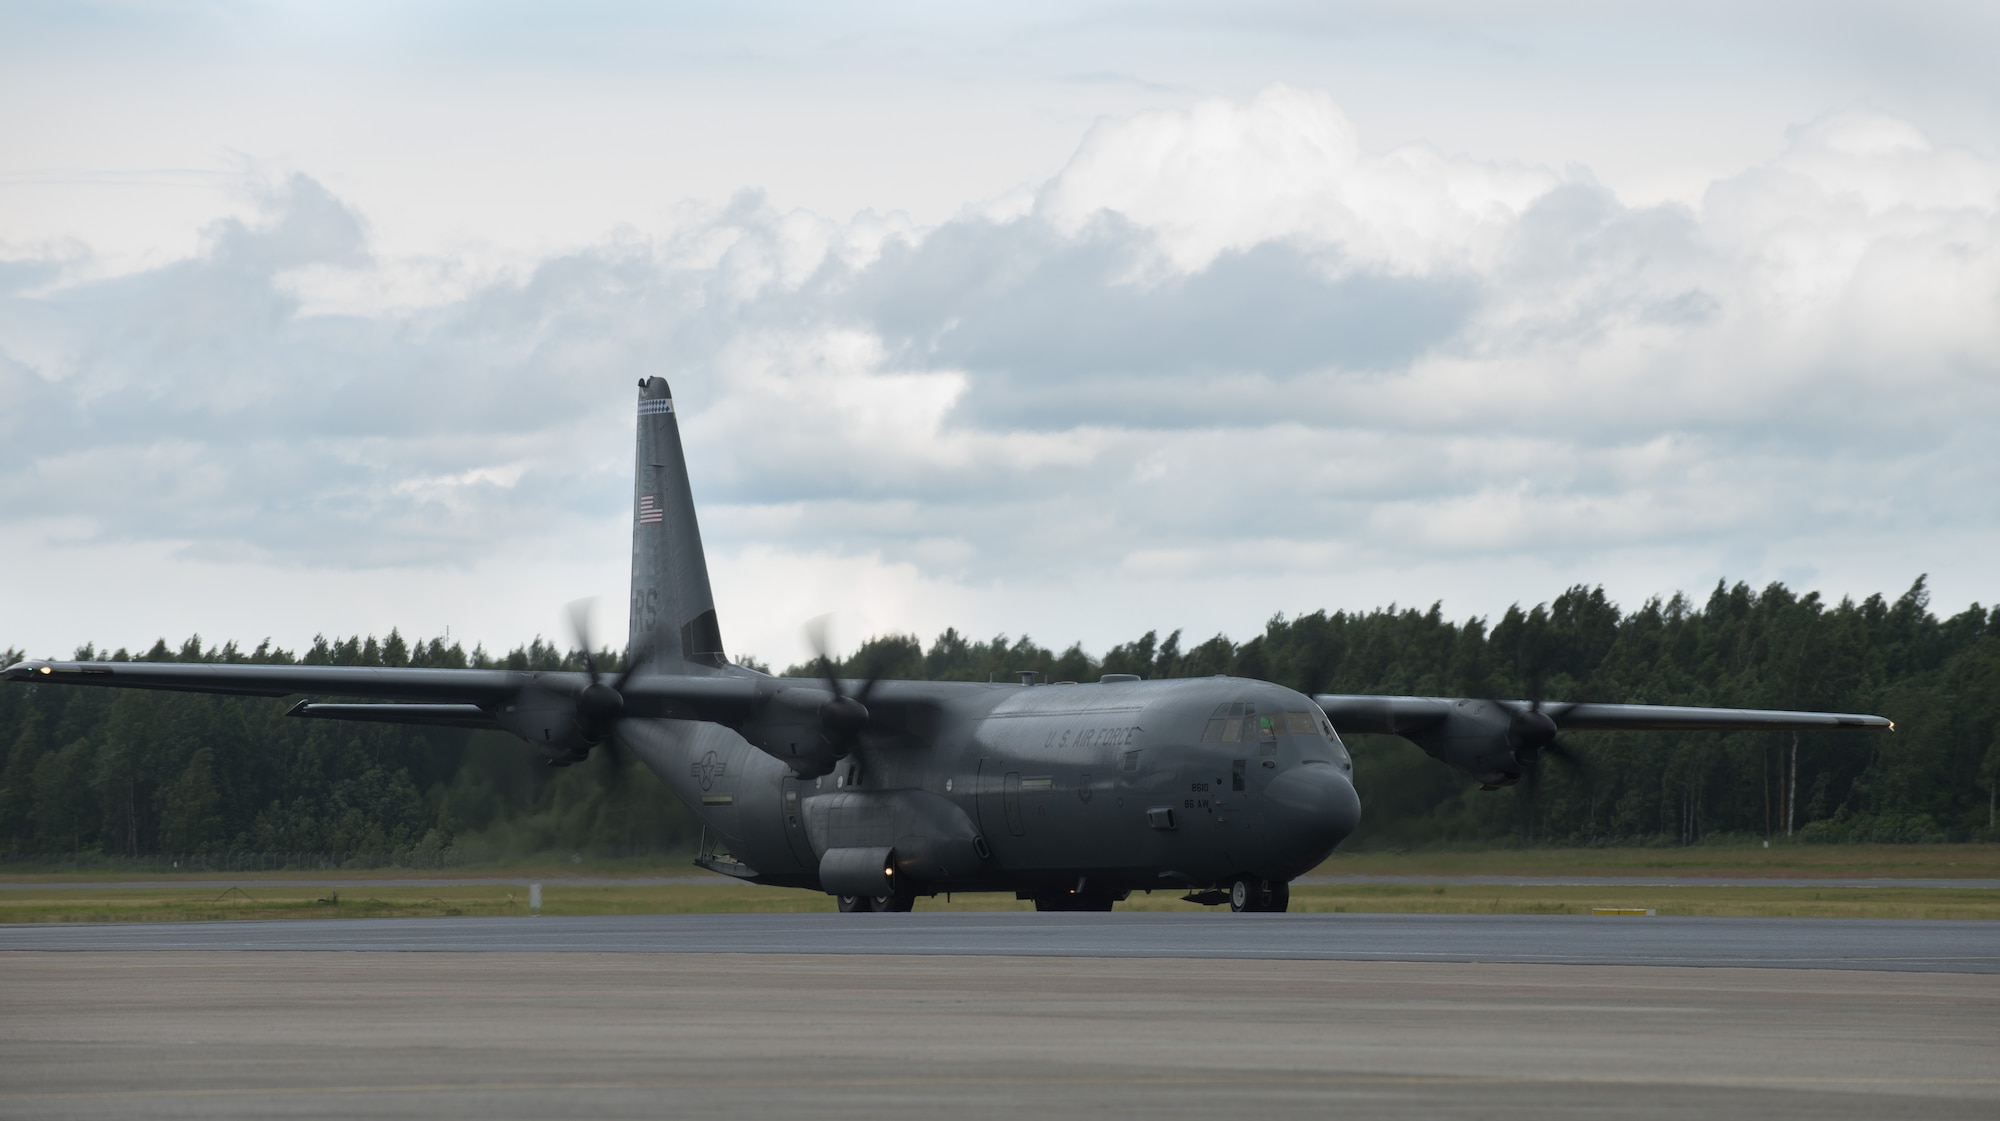 A C-130 J-model taxis into place at the Lielvarde Air Base, Latvia, June 17, 2014 in part of the exercise Saber Strike 2014. In total, three 37th AS airframes landed on Lielvarde, making them the first ever U.S. Air Force aircraft to land on the runway. The 37th AS aircraft brought approximately 92 Airmen from the 435th Contingency Response Group and equipment needed to build a bare base during the Air Force-specific training. (U.S. Air Force photo/Senior Airman Jonathan Stefanko)